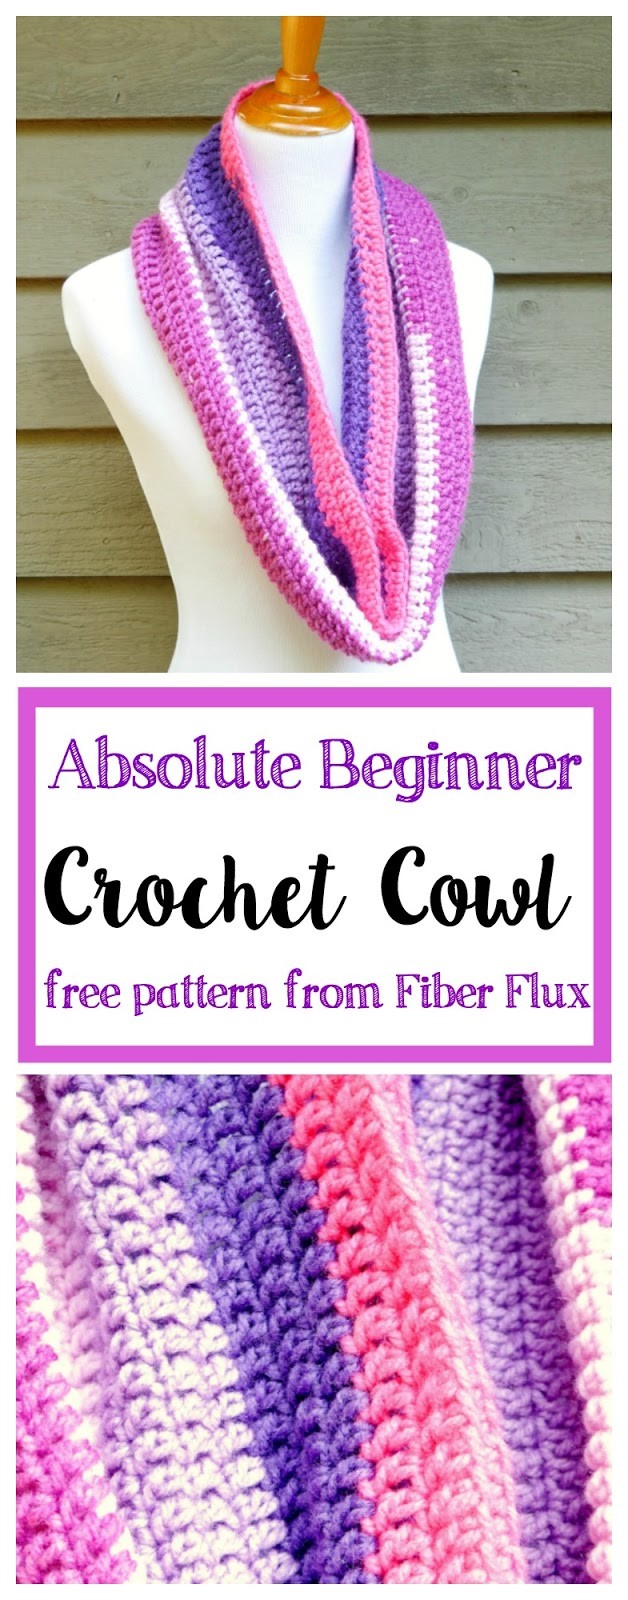 Fiber Flux: How To Crochet A Cowl For The Absolute Beginner!